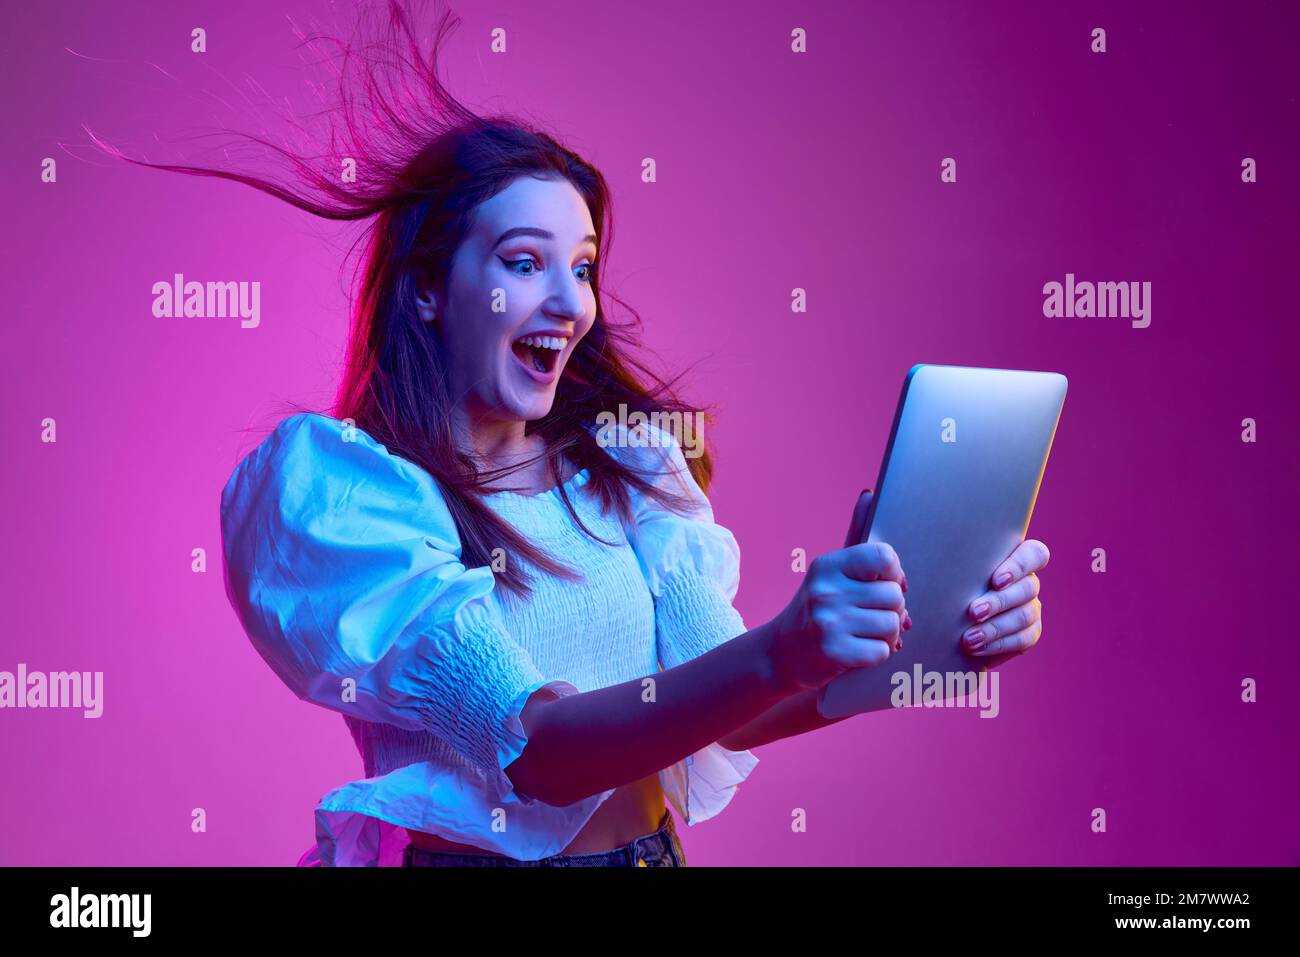 Portrait of young emotive girl cheerfully looking on tablet over pink background in neon light. Concept of emotions, youth, lifestyle Stock Photo